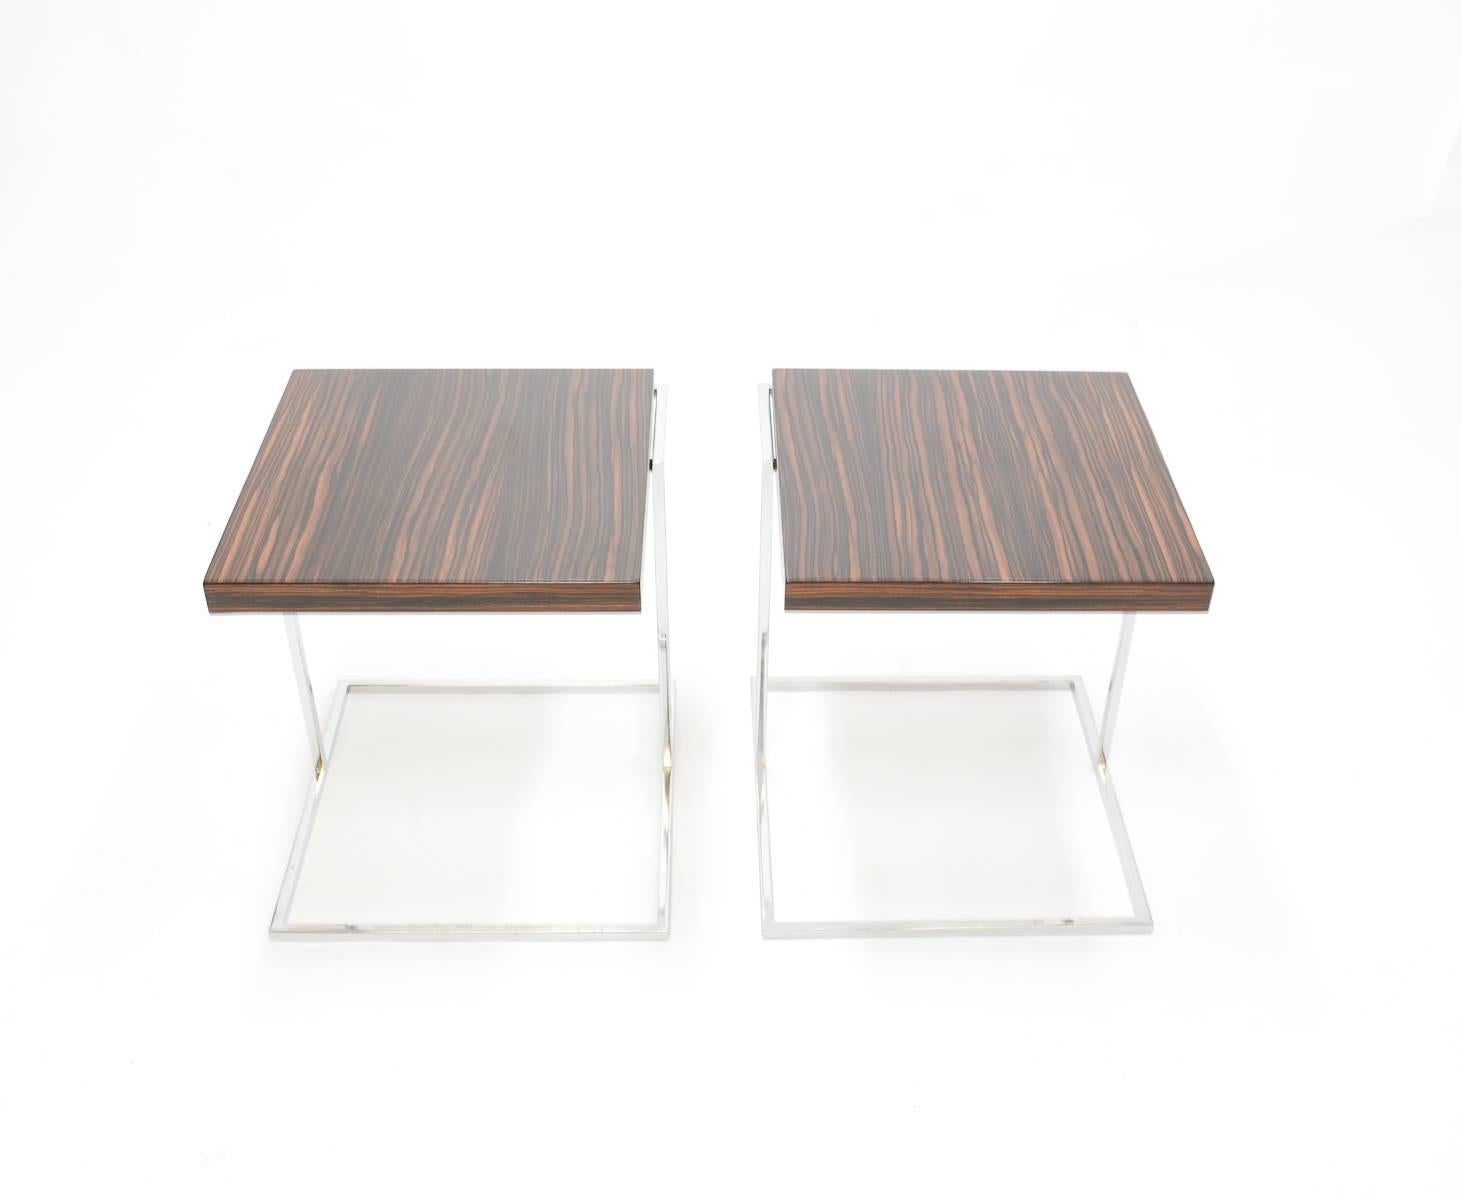 A pair of stunning zebra wood and chrome cantilever side tables. Their graceful cantilever design delivers strength, symmetry and simplicity while the zebra wood tops perfect each one with complimentary but unique natural patterns and shading.
 